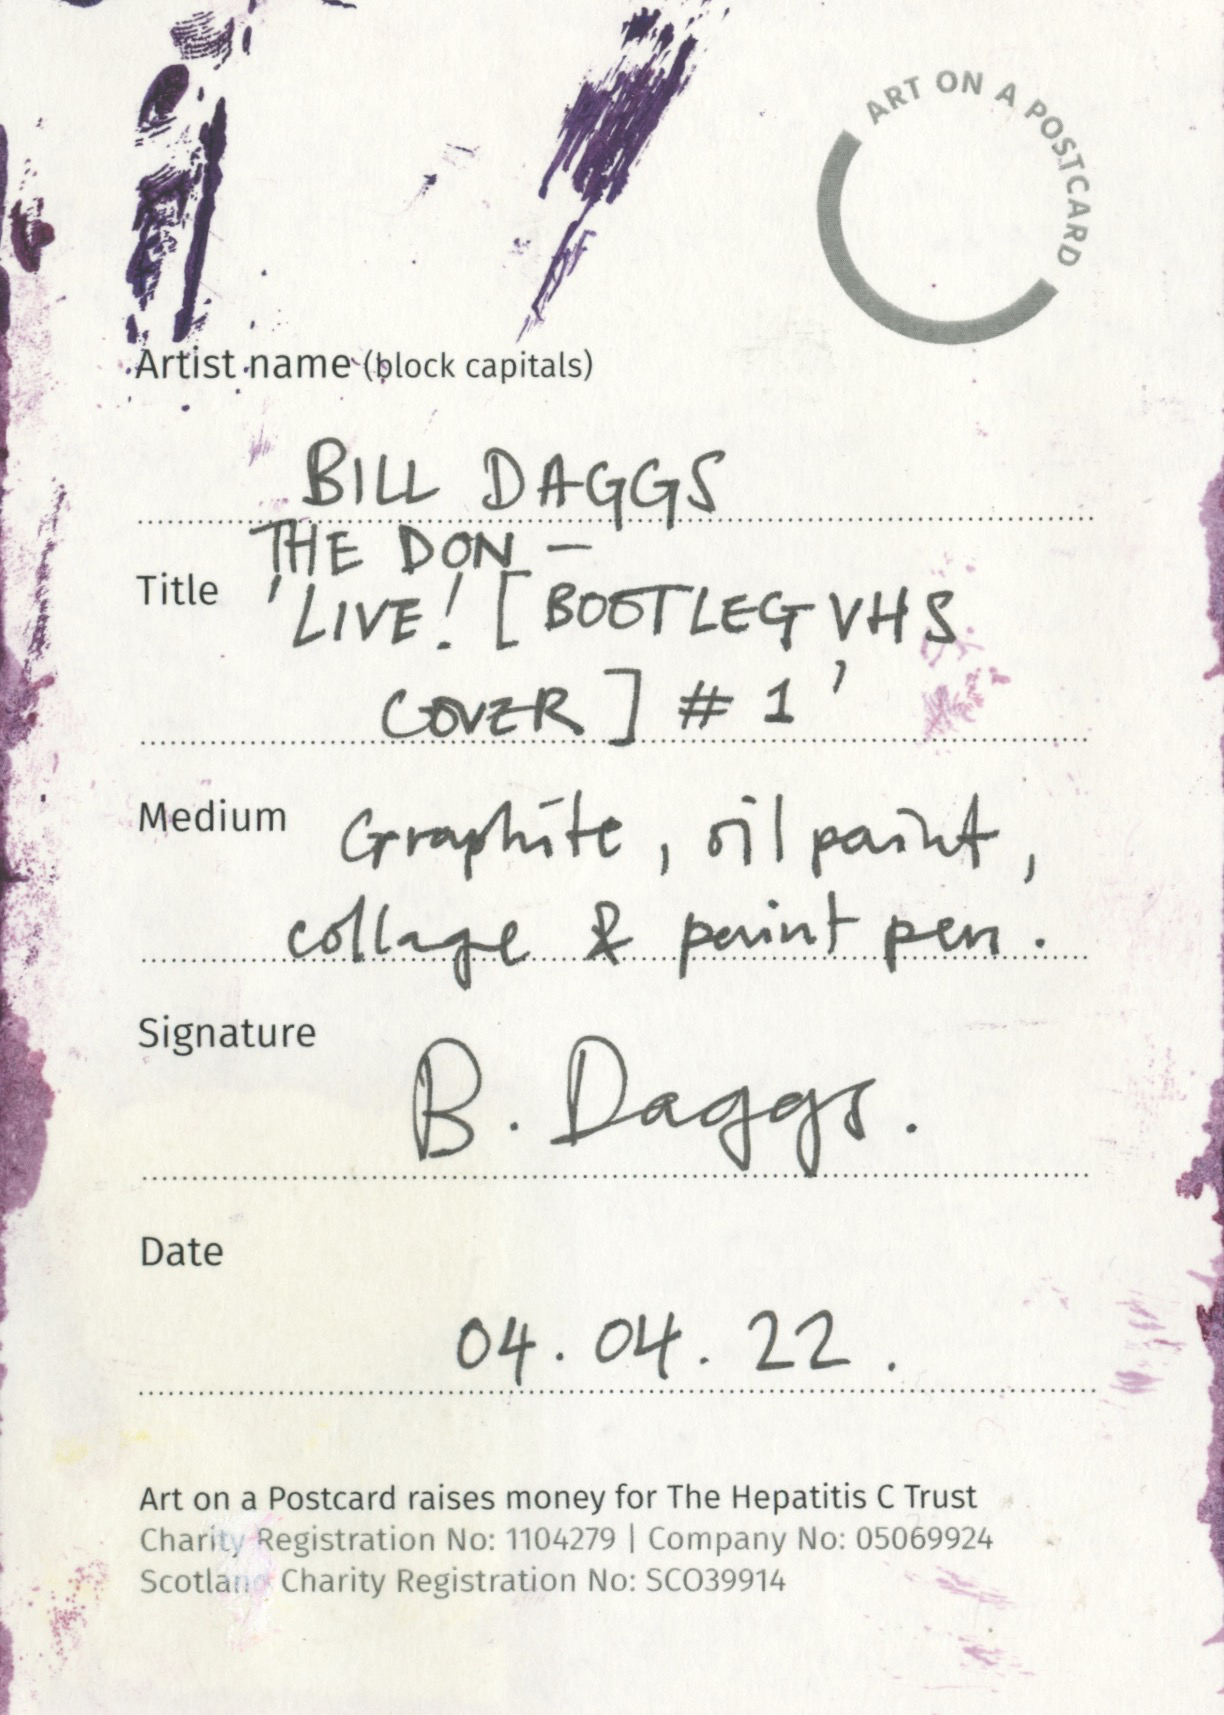 7. Bill Daggs - The Don- Live! (Bootleg VHS Cover) #1 - BACK